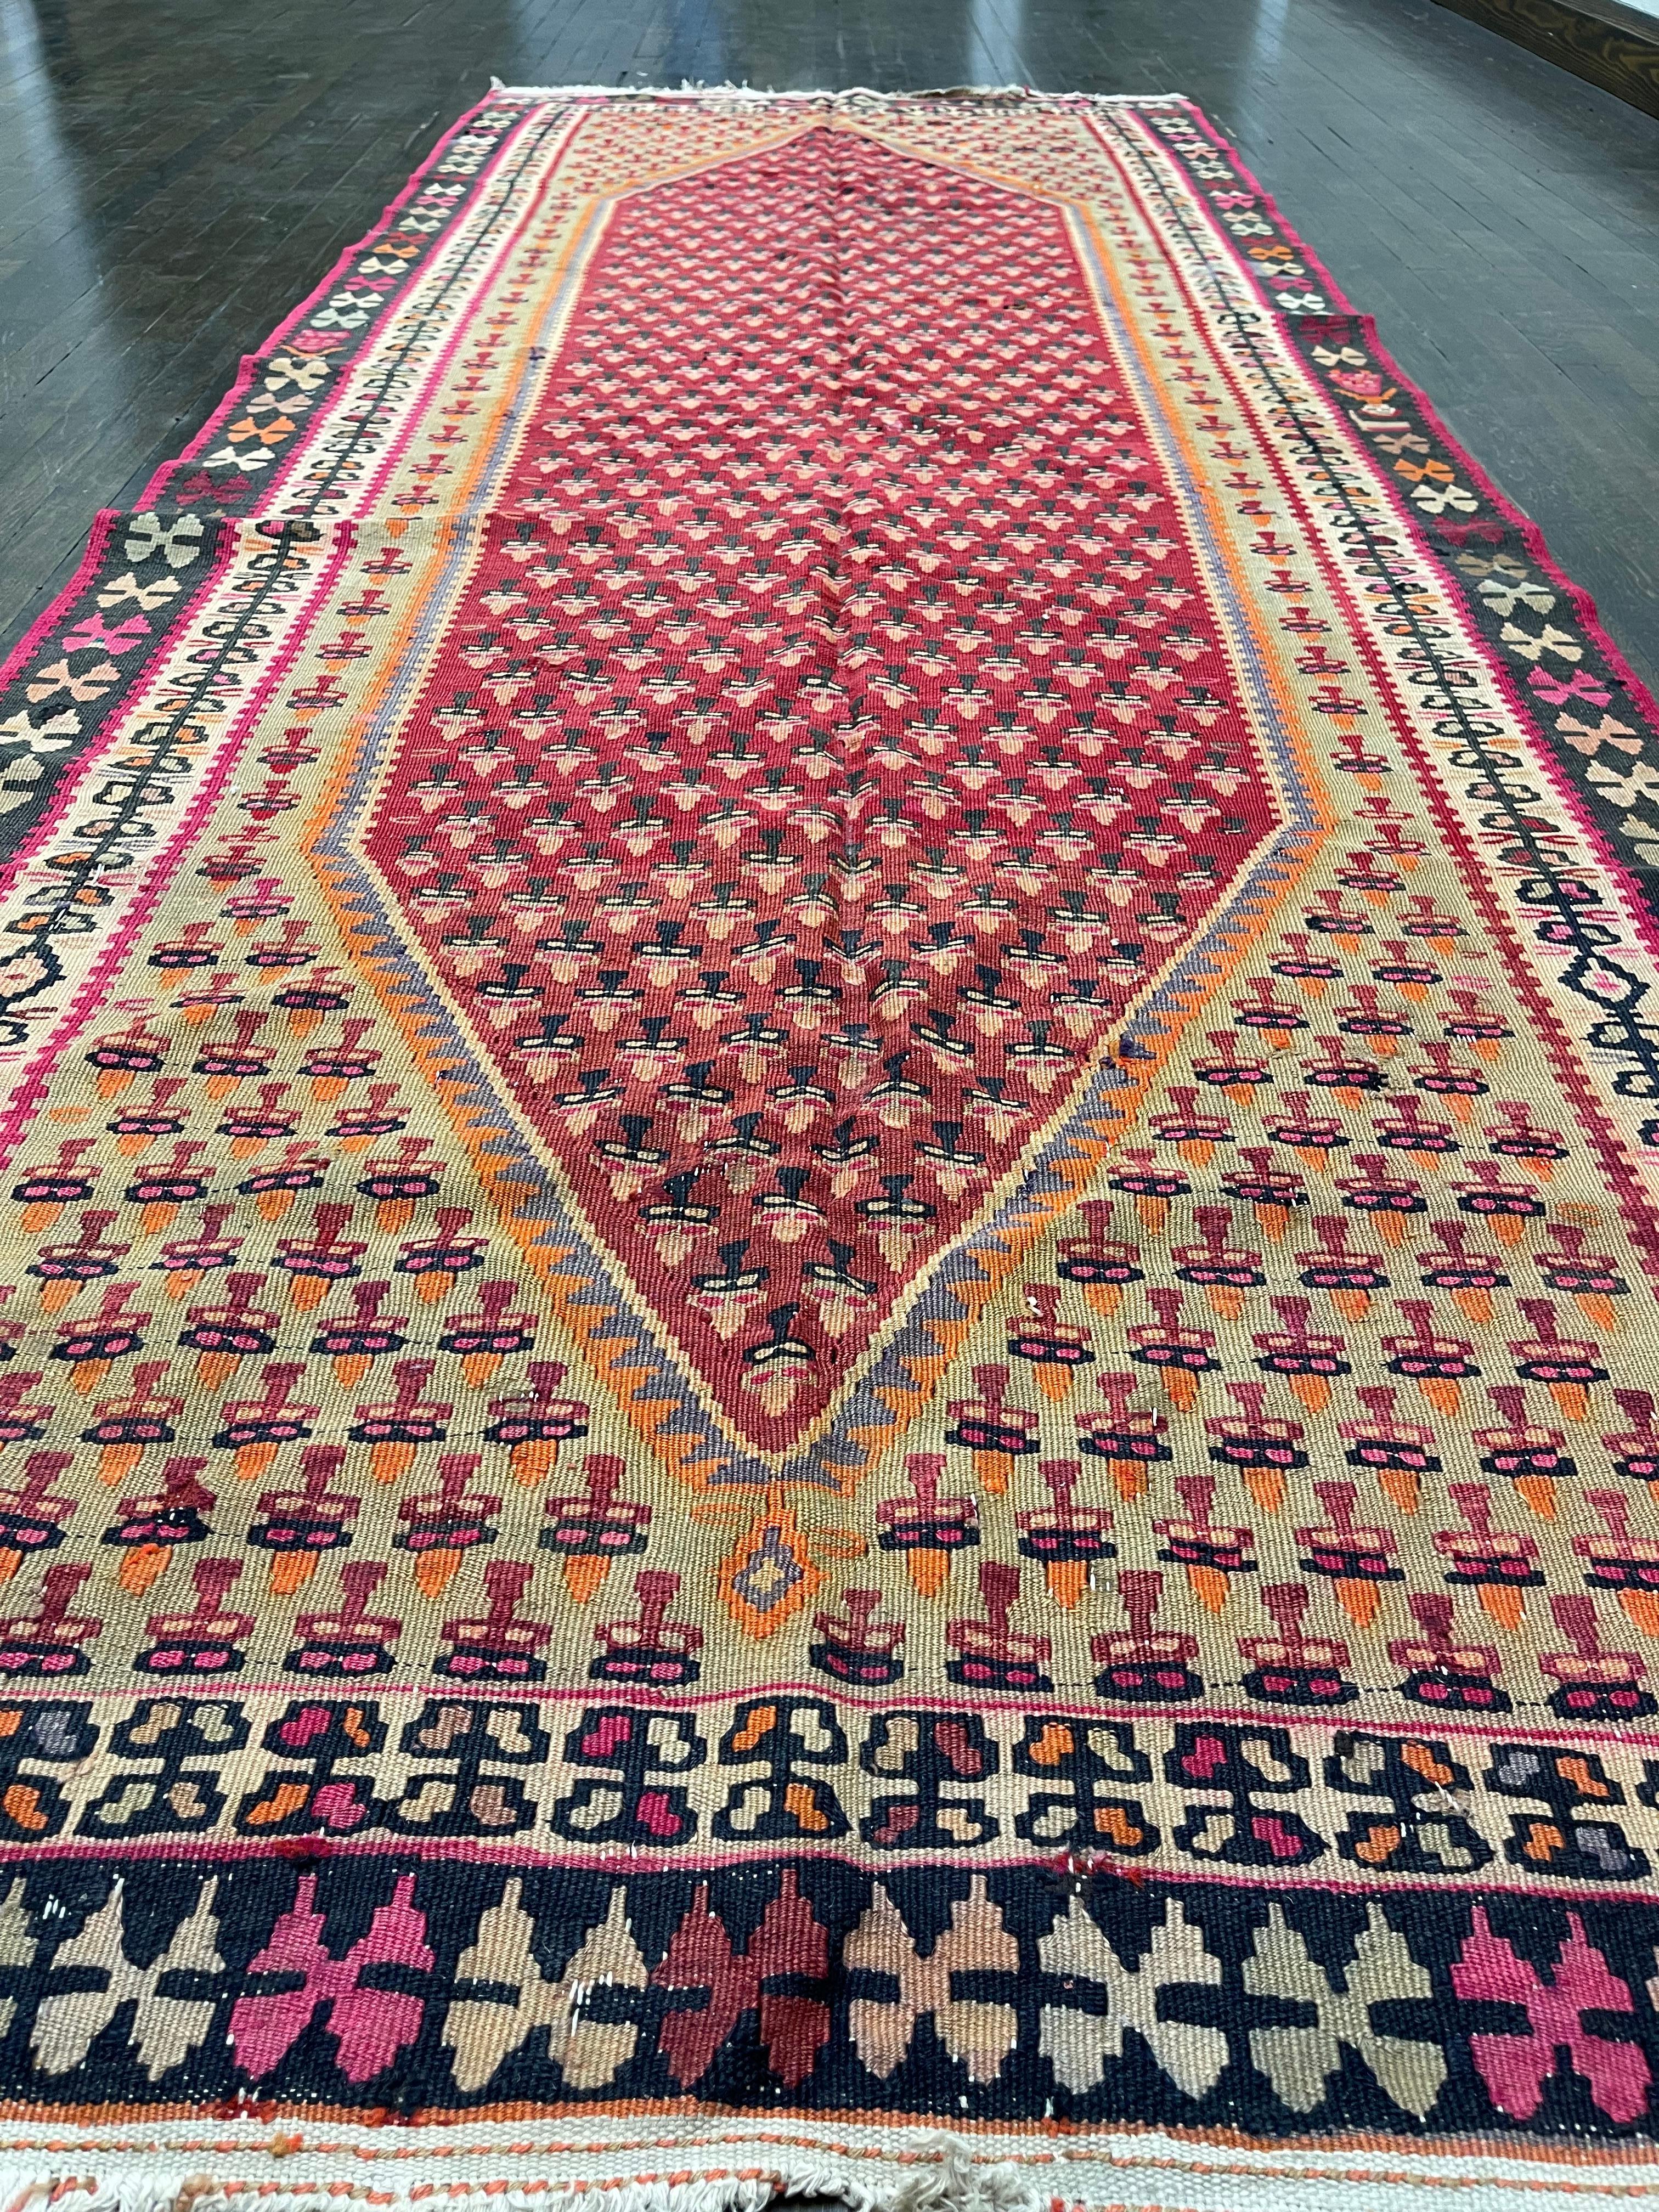 This rug is hand woven in Turkey. Flatweave rug,also known as Kilm are hand-loomed textile with a flat surface-without pile-which present a relatively two dimensional surface. Their basic structure is a plain weave which results when warp and weft